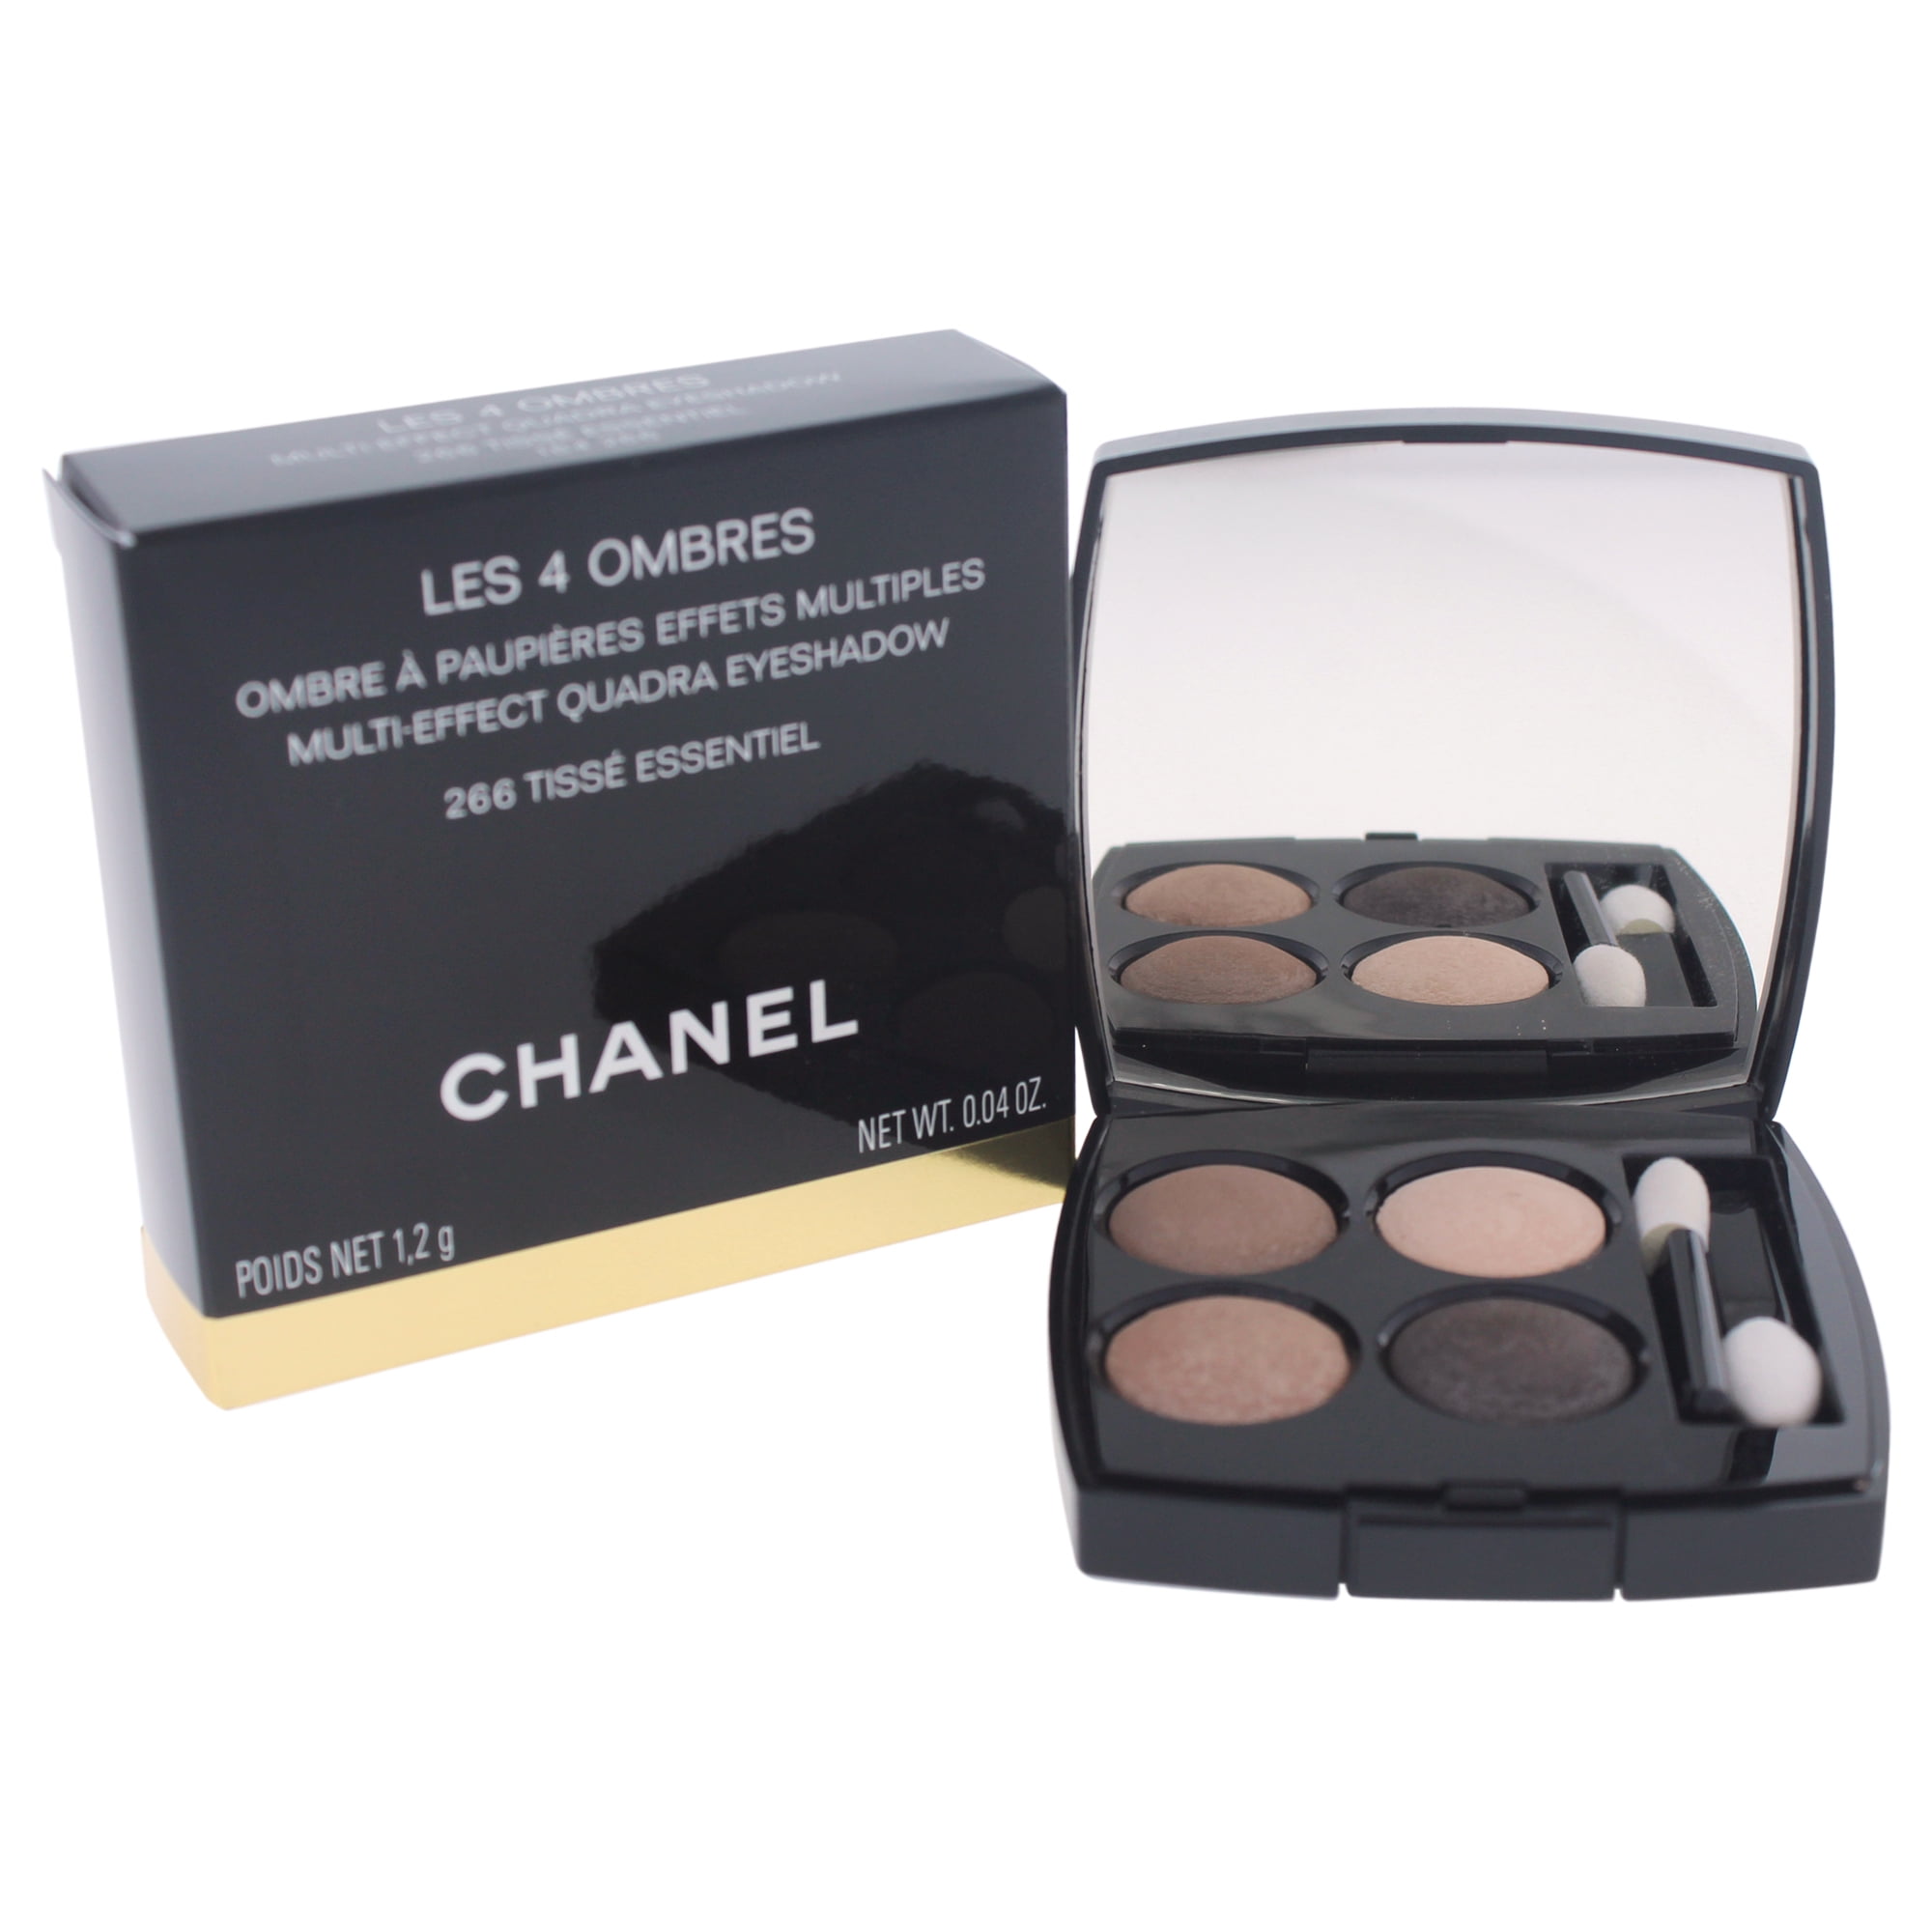 Chanel Road Movie Les 4 Ombres Eyeshadow Palette Review, Photos, Swatches